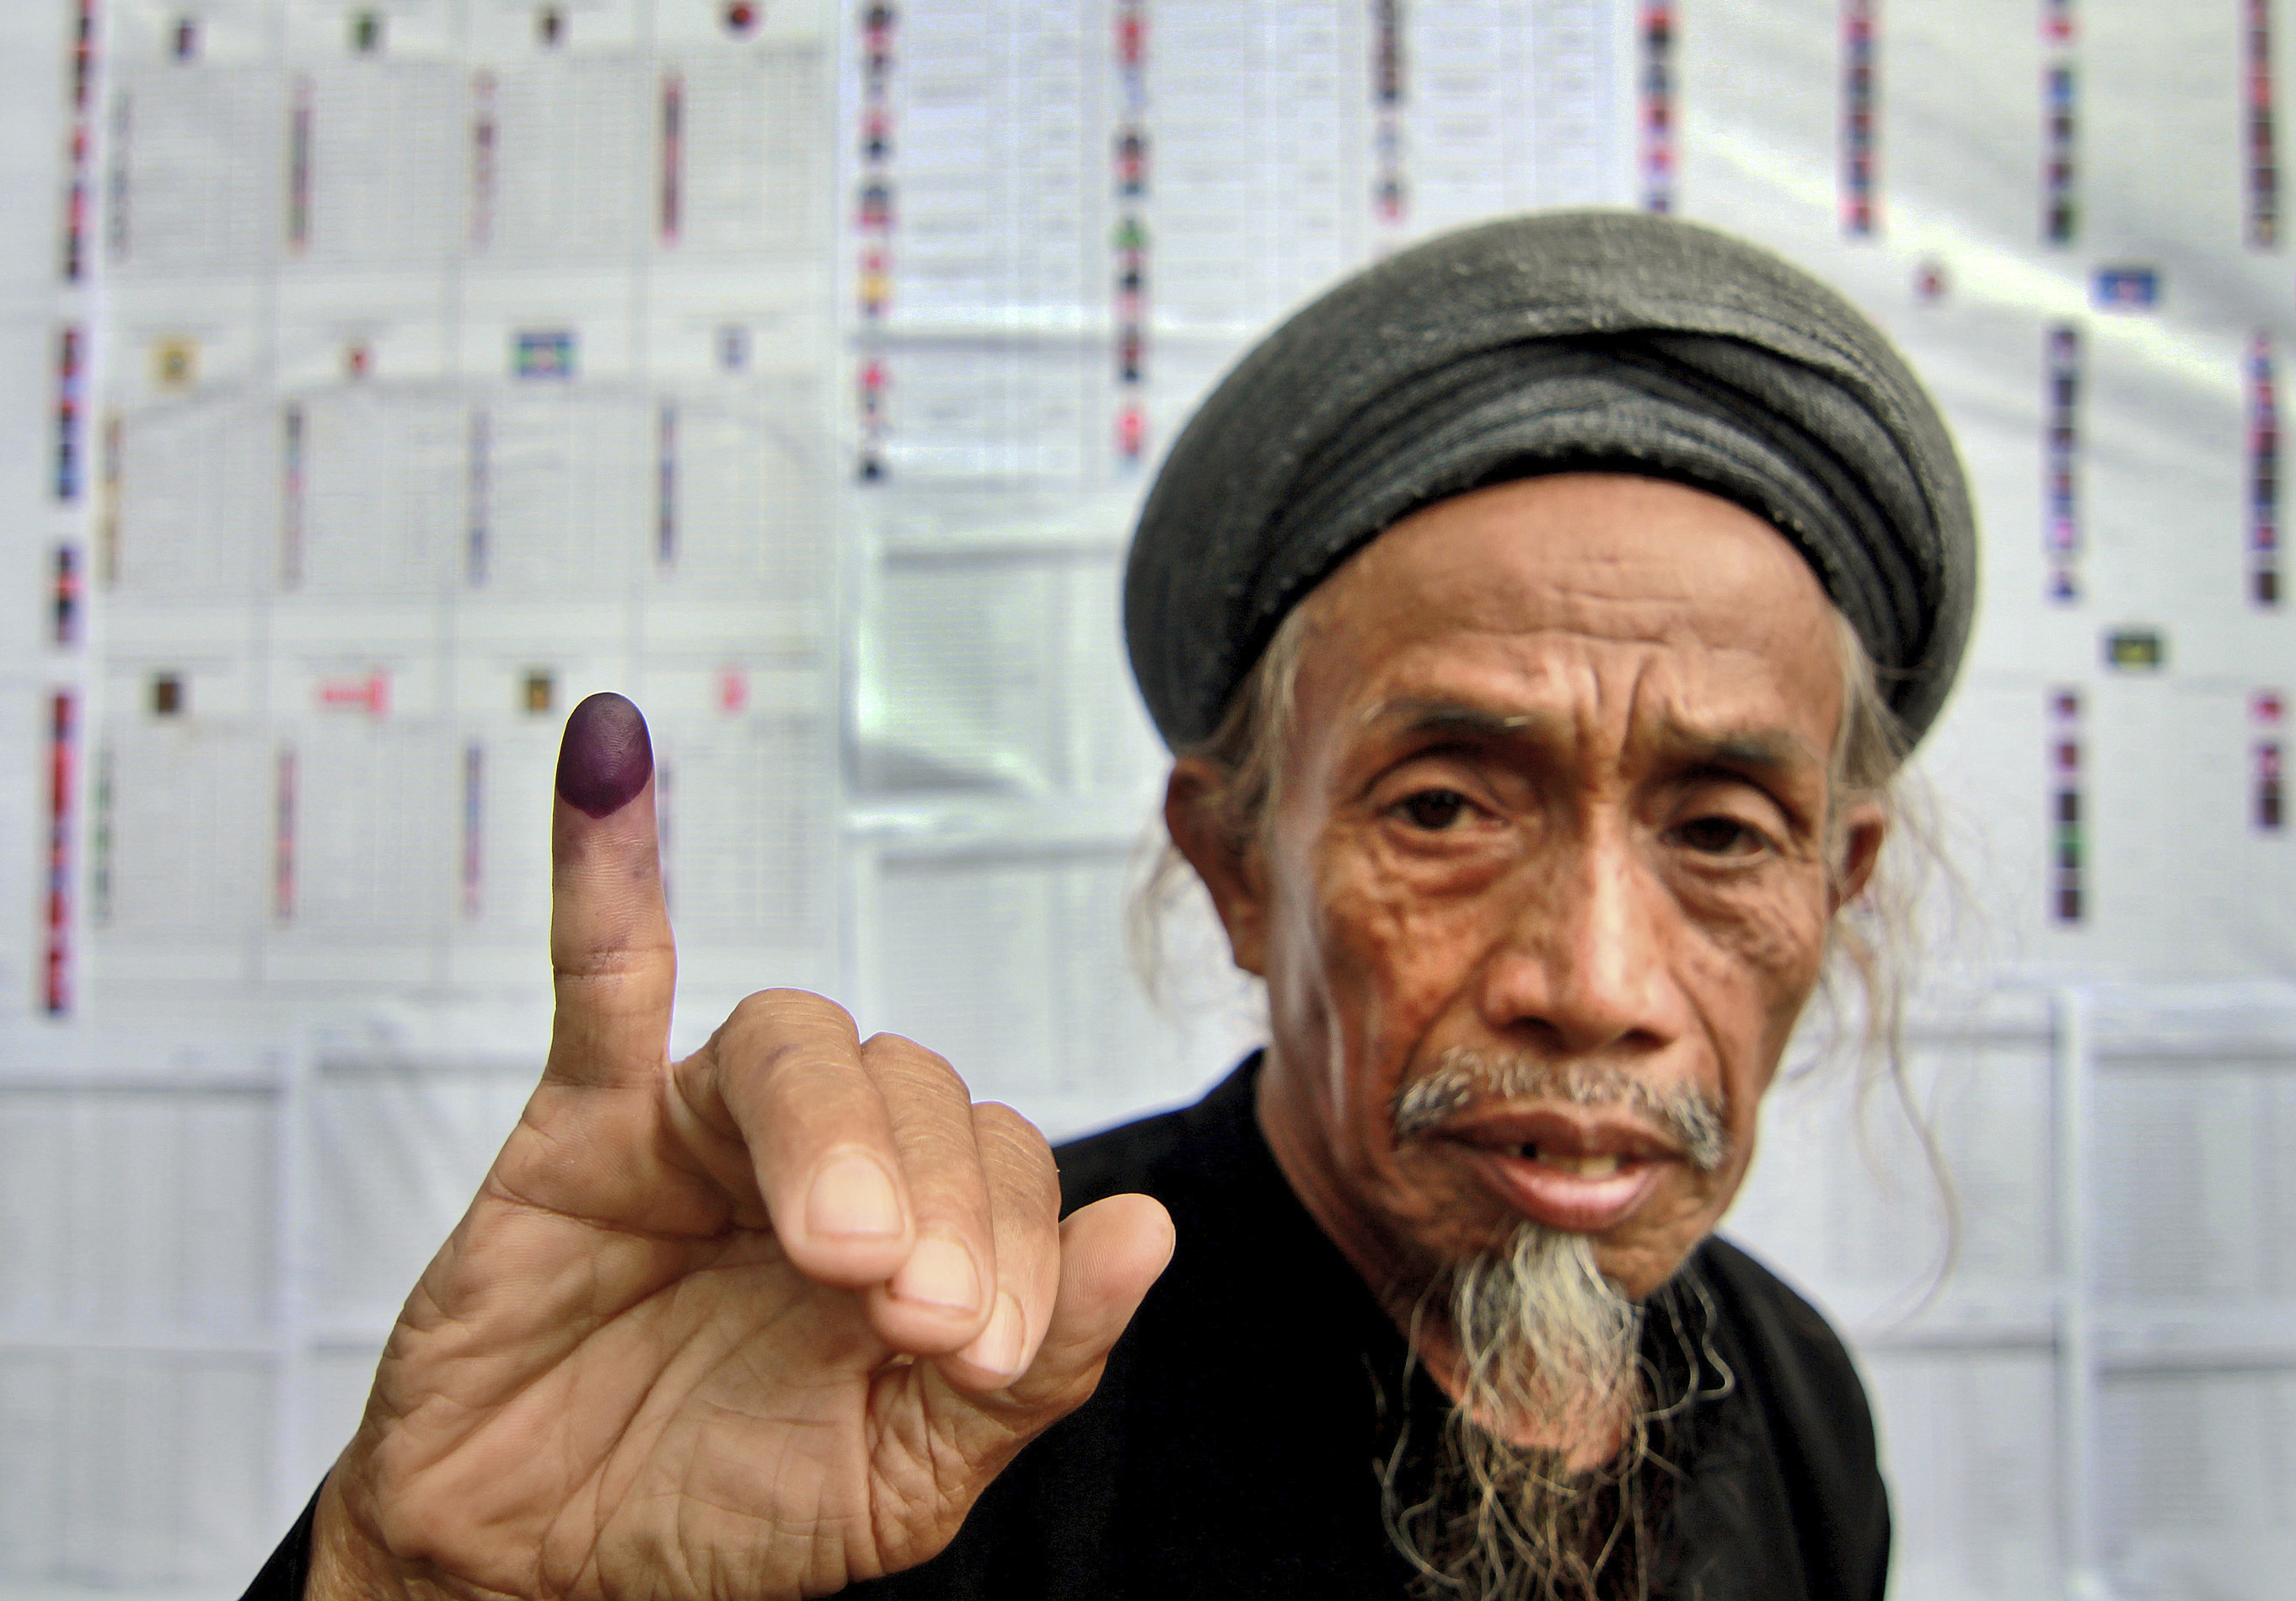 A member of the An-Nadzir Muslim sect shows his inked finger after casting his ballot at a polling station during the Indonesian parliamentary elections in Gowa, South Sulawesi province, on April 9, 2014 (Masyudi S. Firmansyah&mdash;AP)